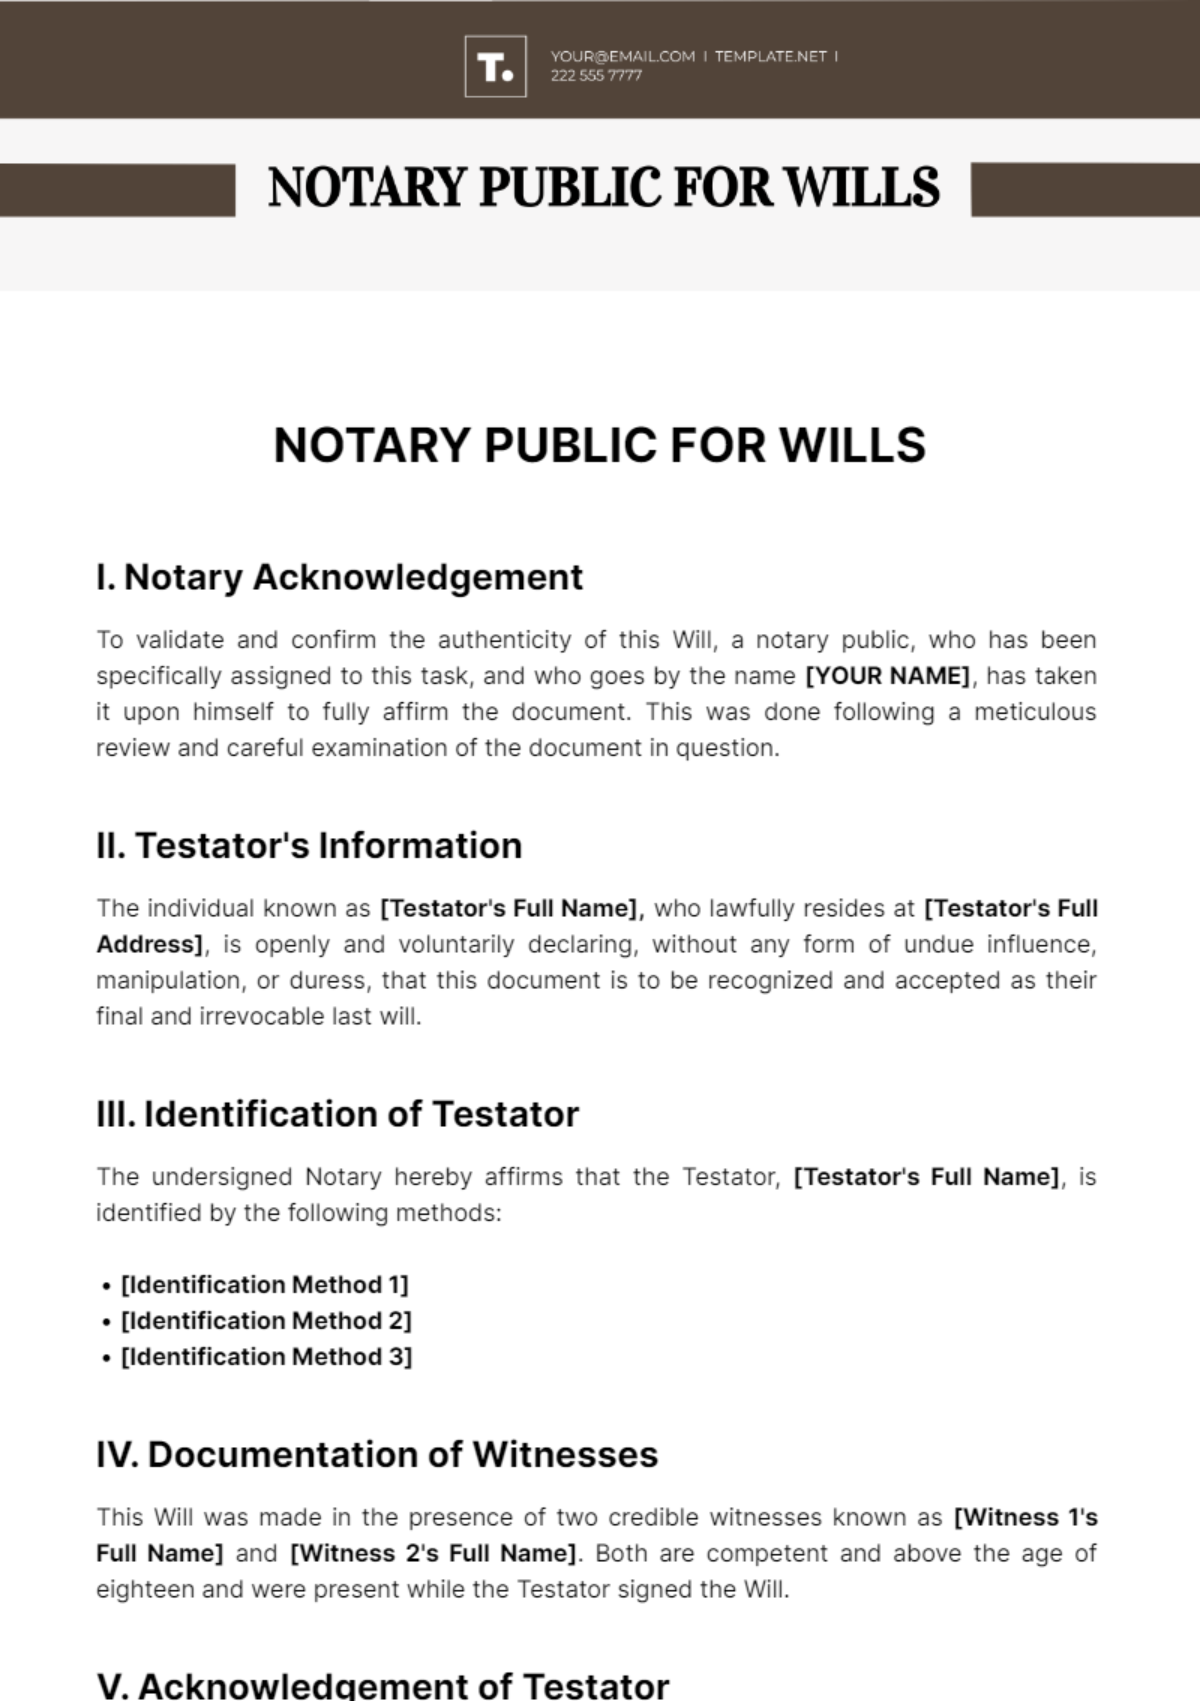 Free Notary Public For Wills Template